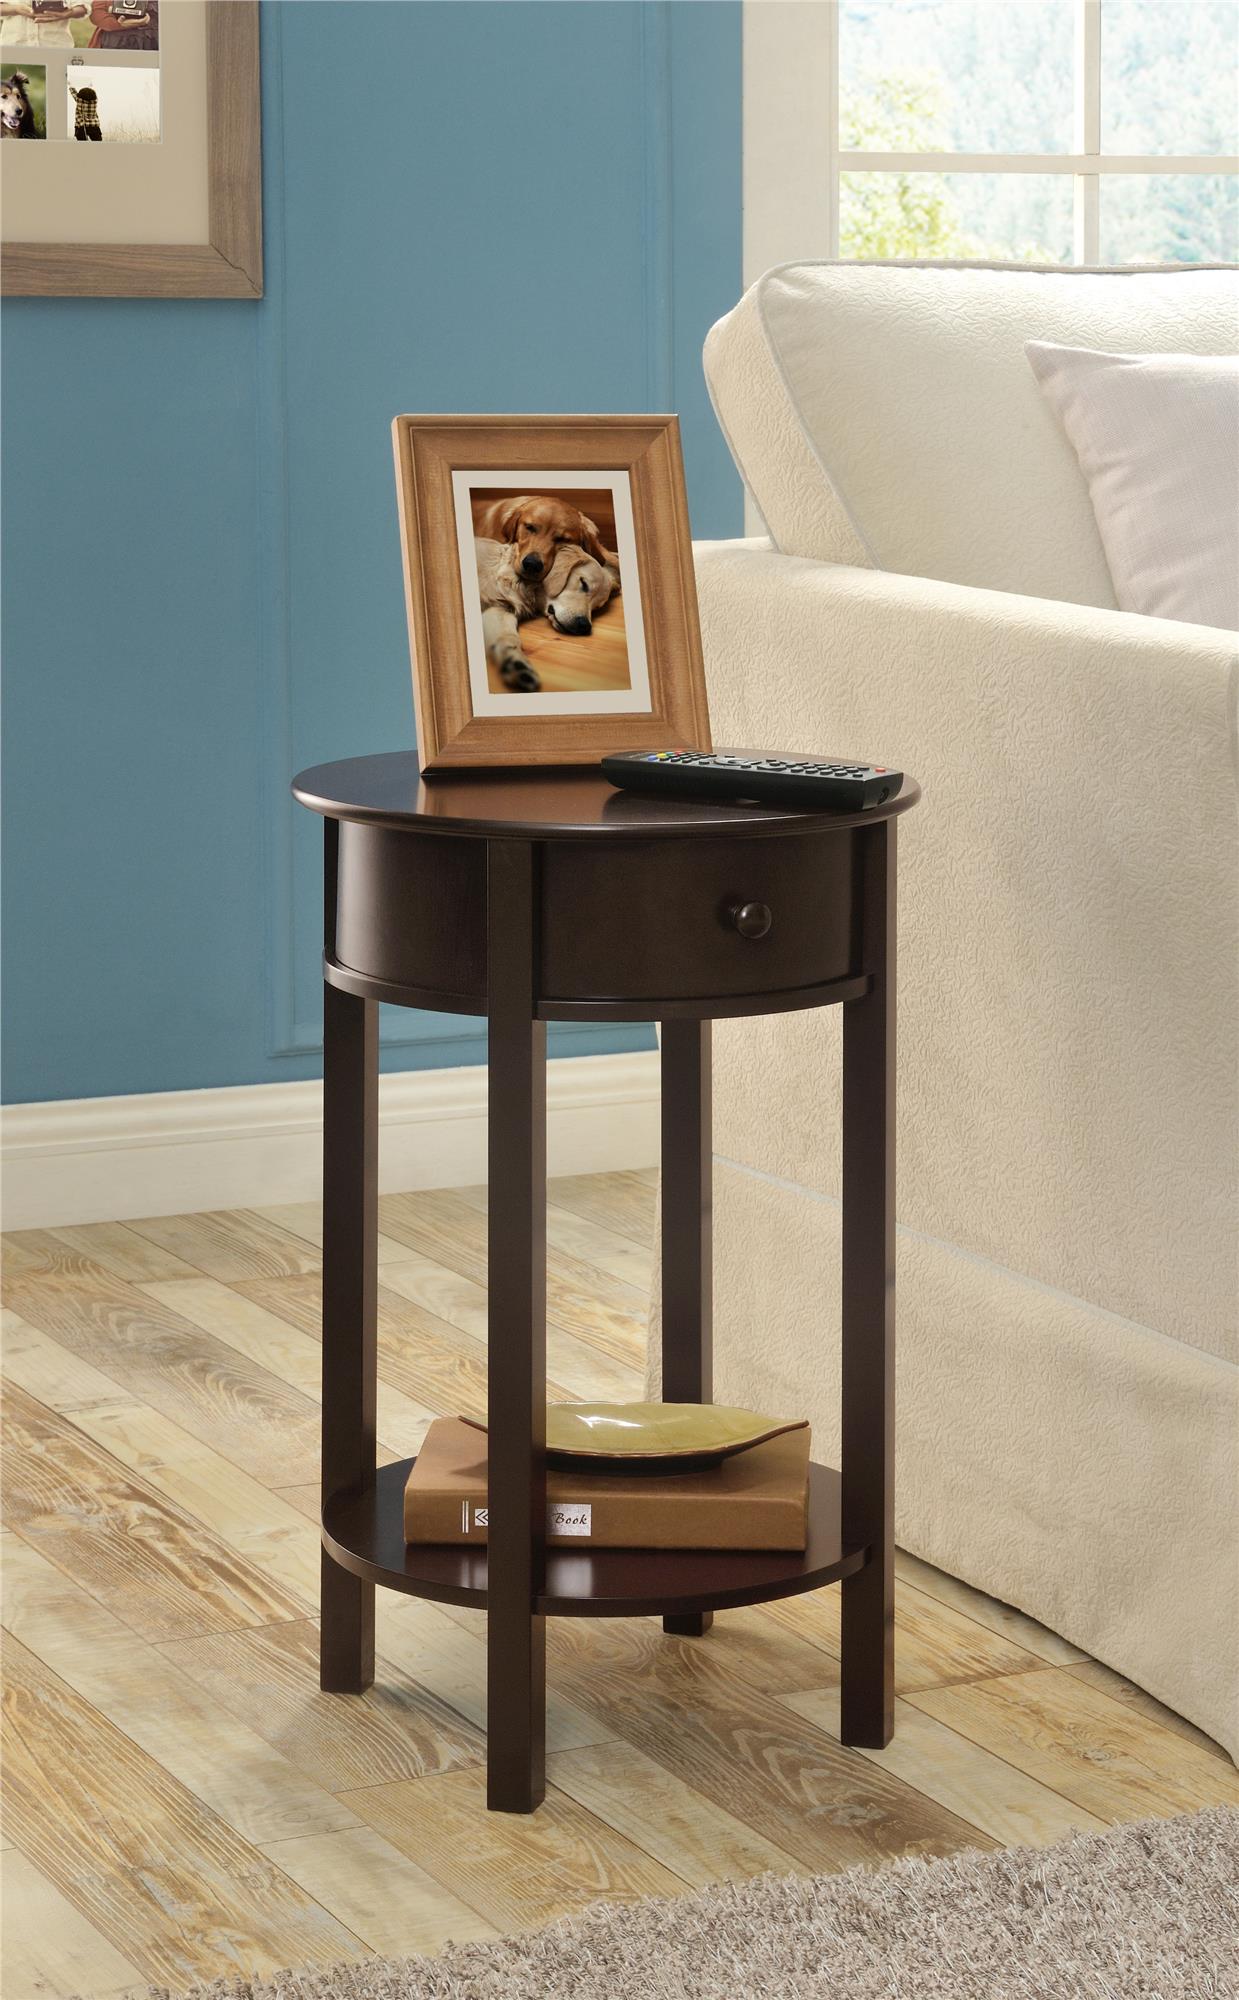 ameriwood home tipton round accent table espresso ikea small height and chairs cube tables wall clock beige tablecloth wooden storage crates west elm tripod lamp cream metal side